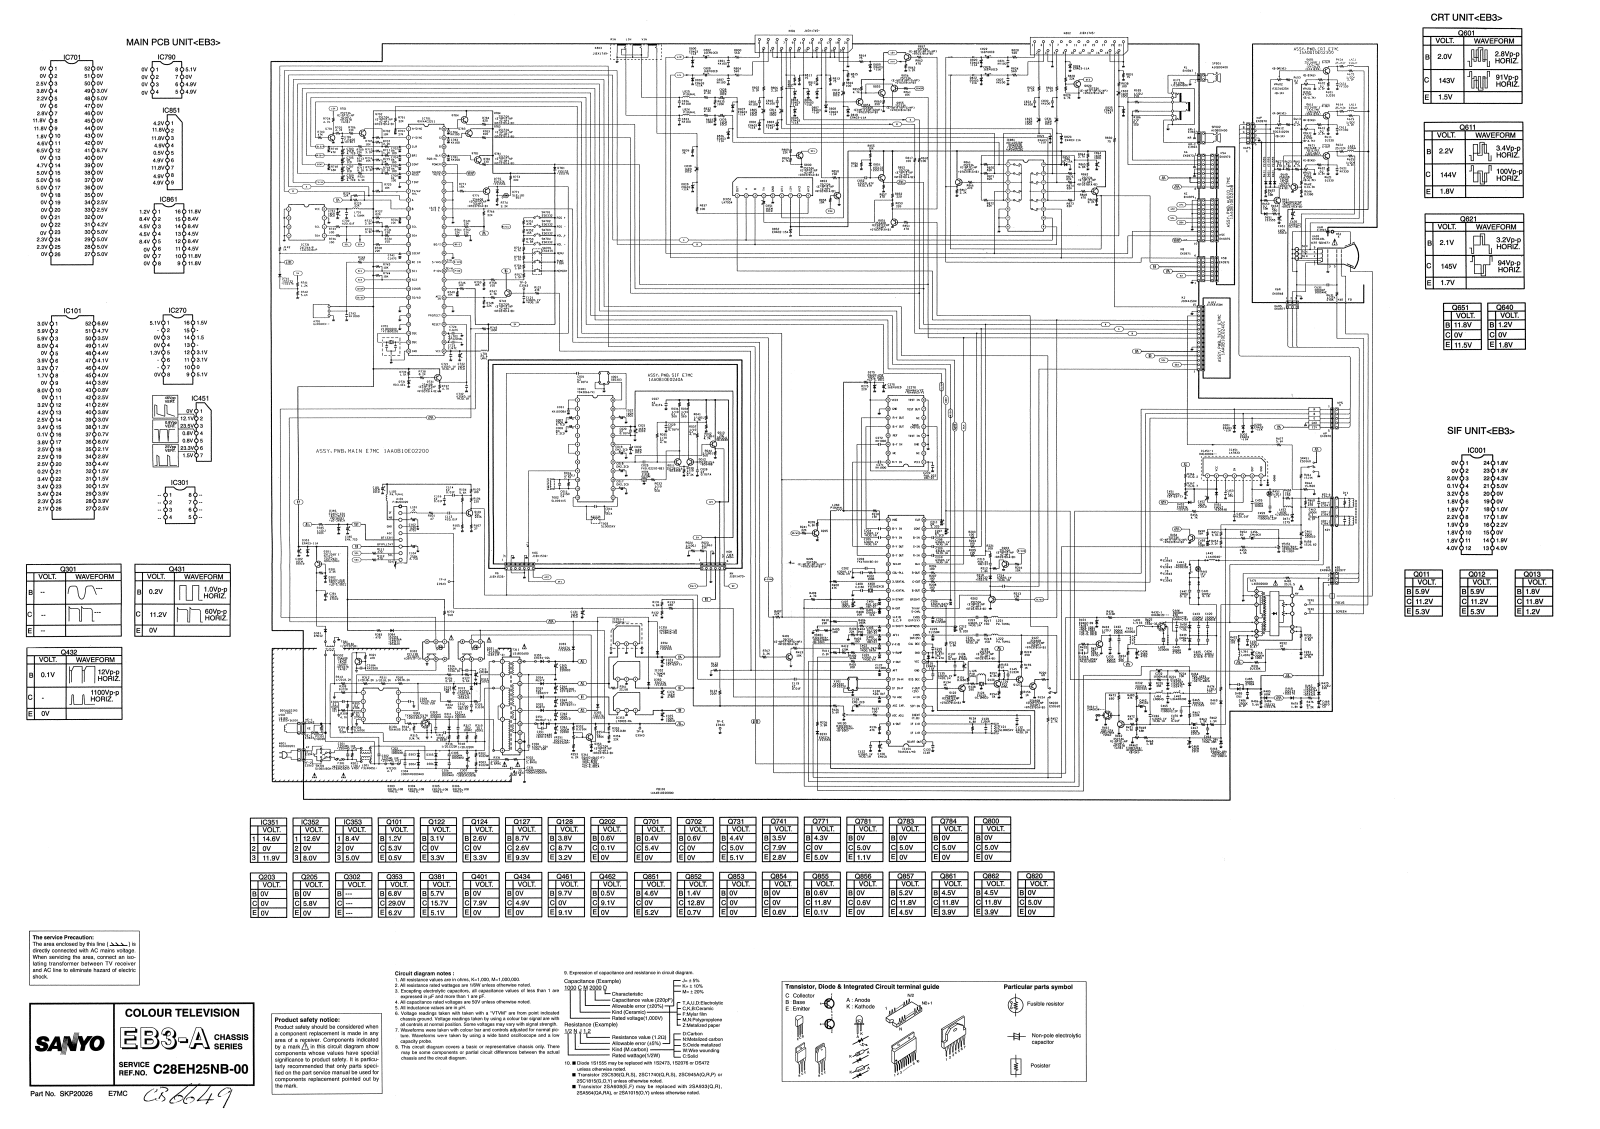 Sanyo C28EH25NB, C28EH25NB-EB3-A Schematic